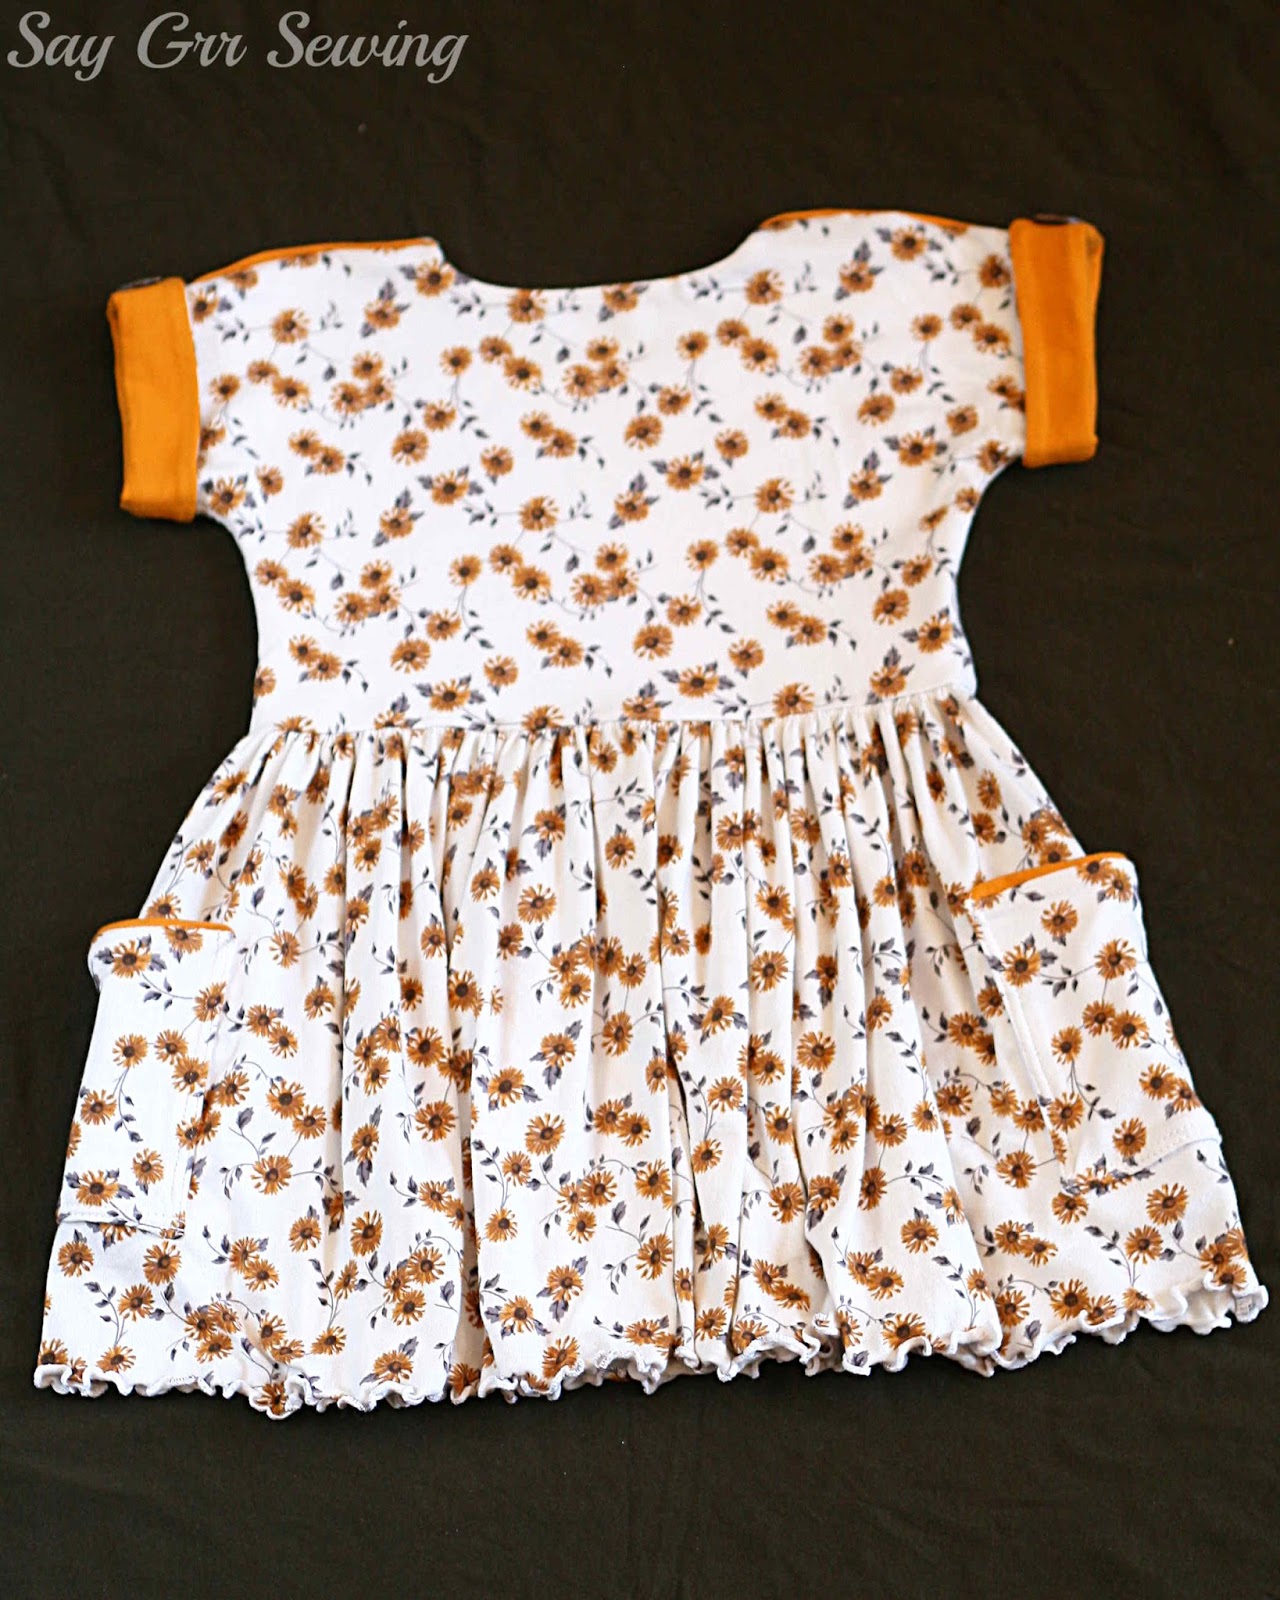 Say Grr Sewing: Knit Sunflower Dress